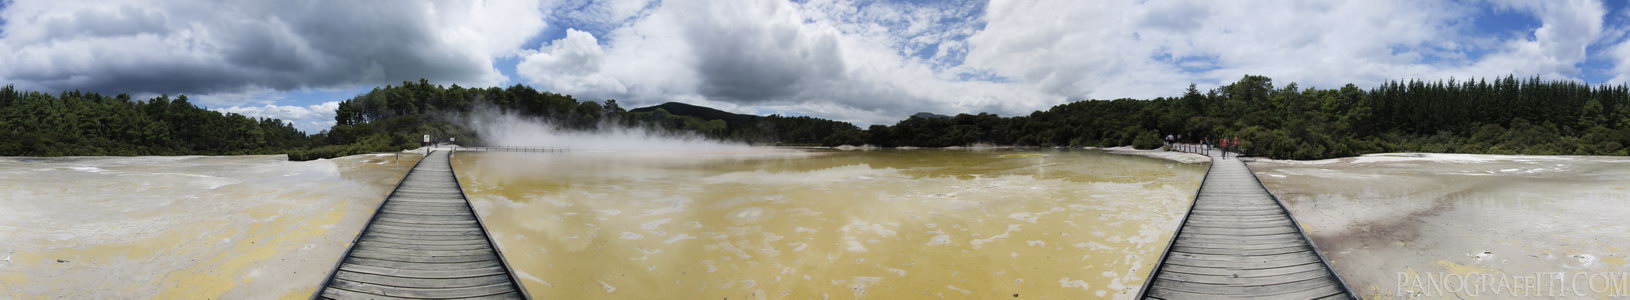 Primrose Terrace Silica Deposits - A 360 degree HDR view of the main attraction at Wai-O-Tapu Geothermal Area outside of Rotorua.